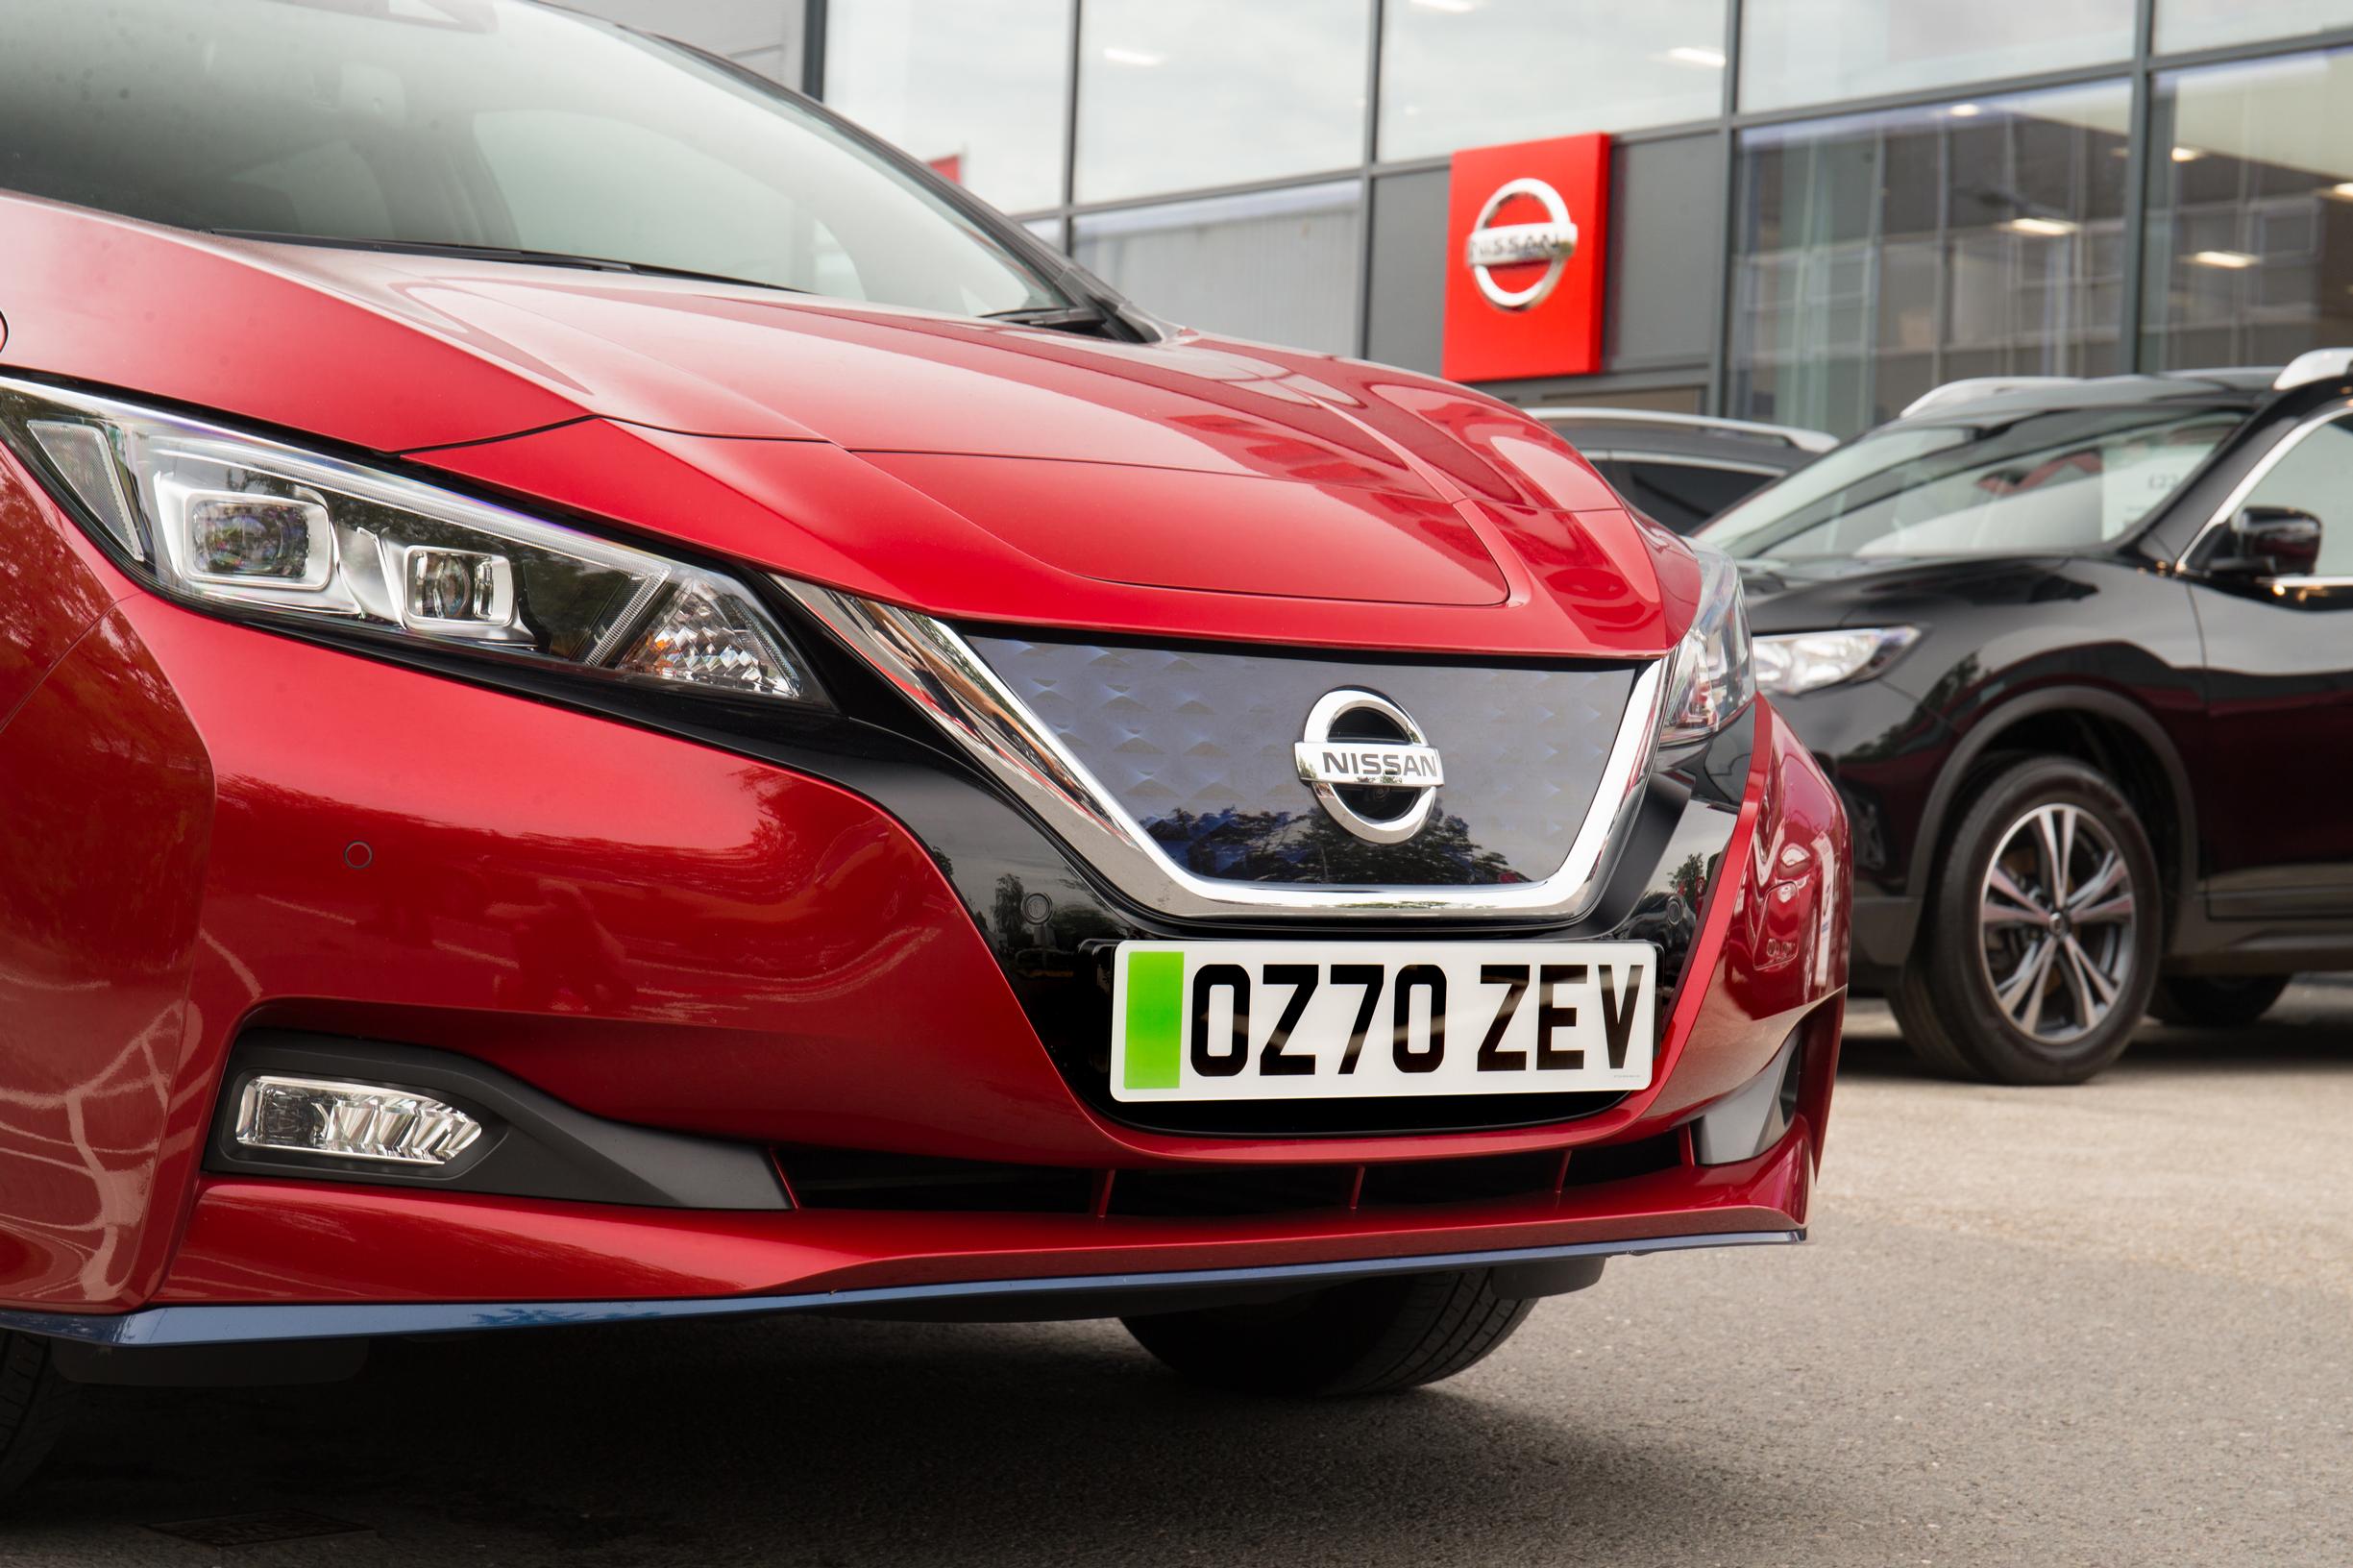 Nissan dealers are fitting the new green number plates to their electric vehicles